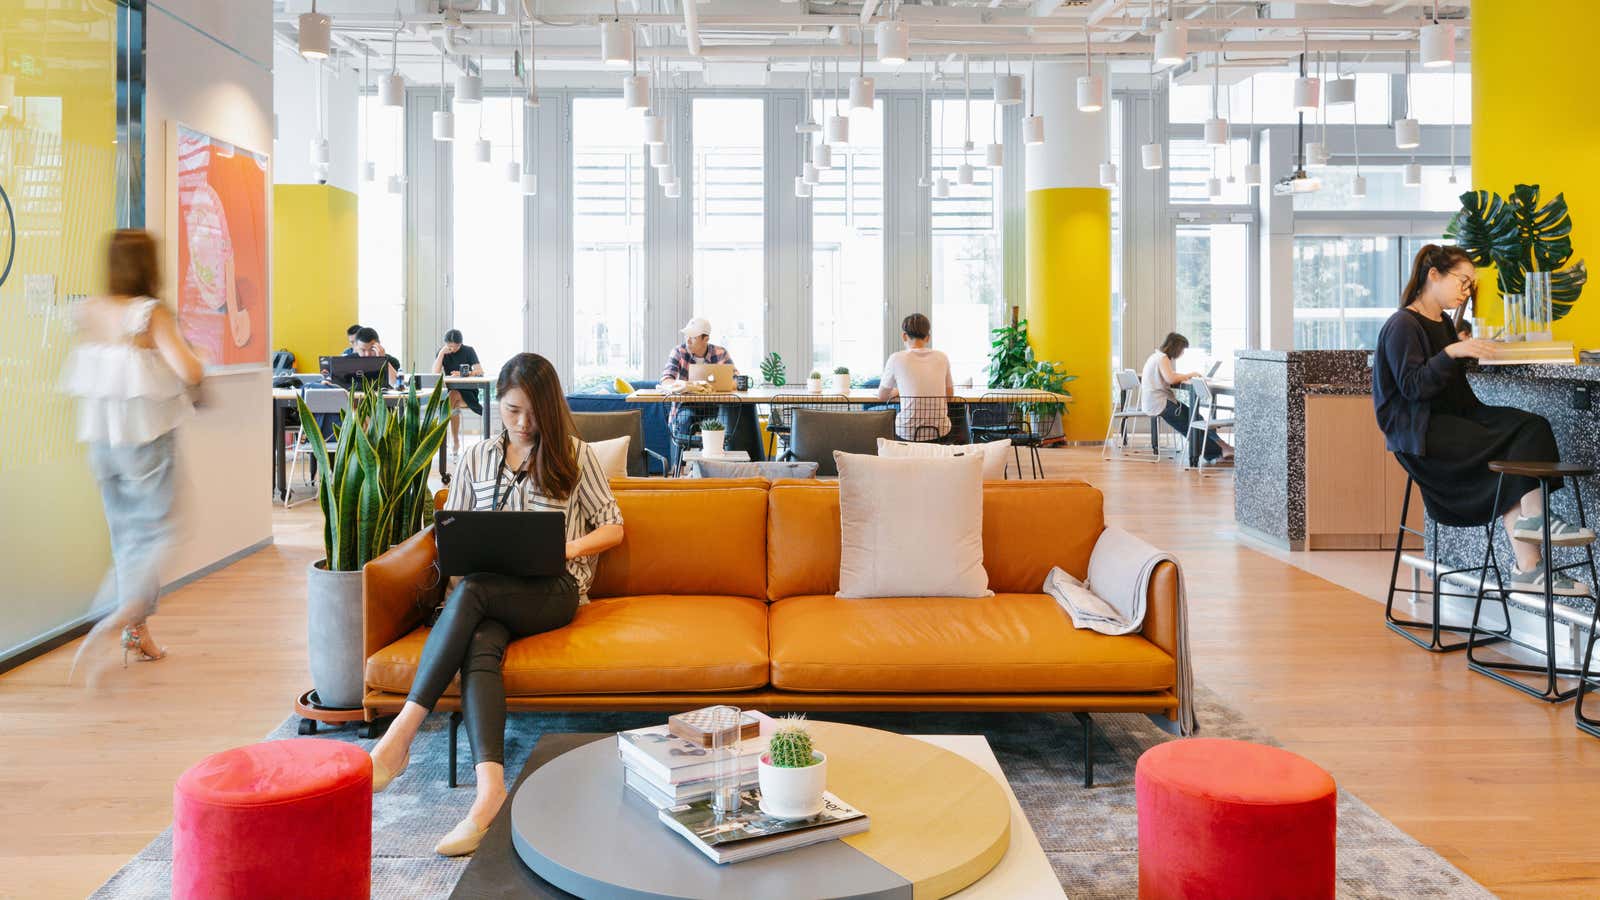 The New York Times called one of WeWork’s planned offices “the kind of place you never have to leave.”